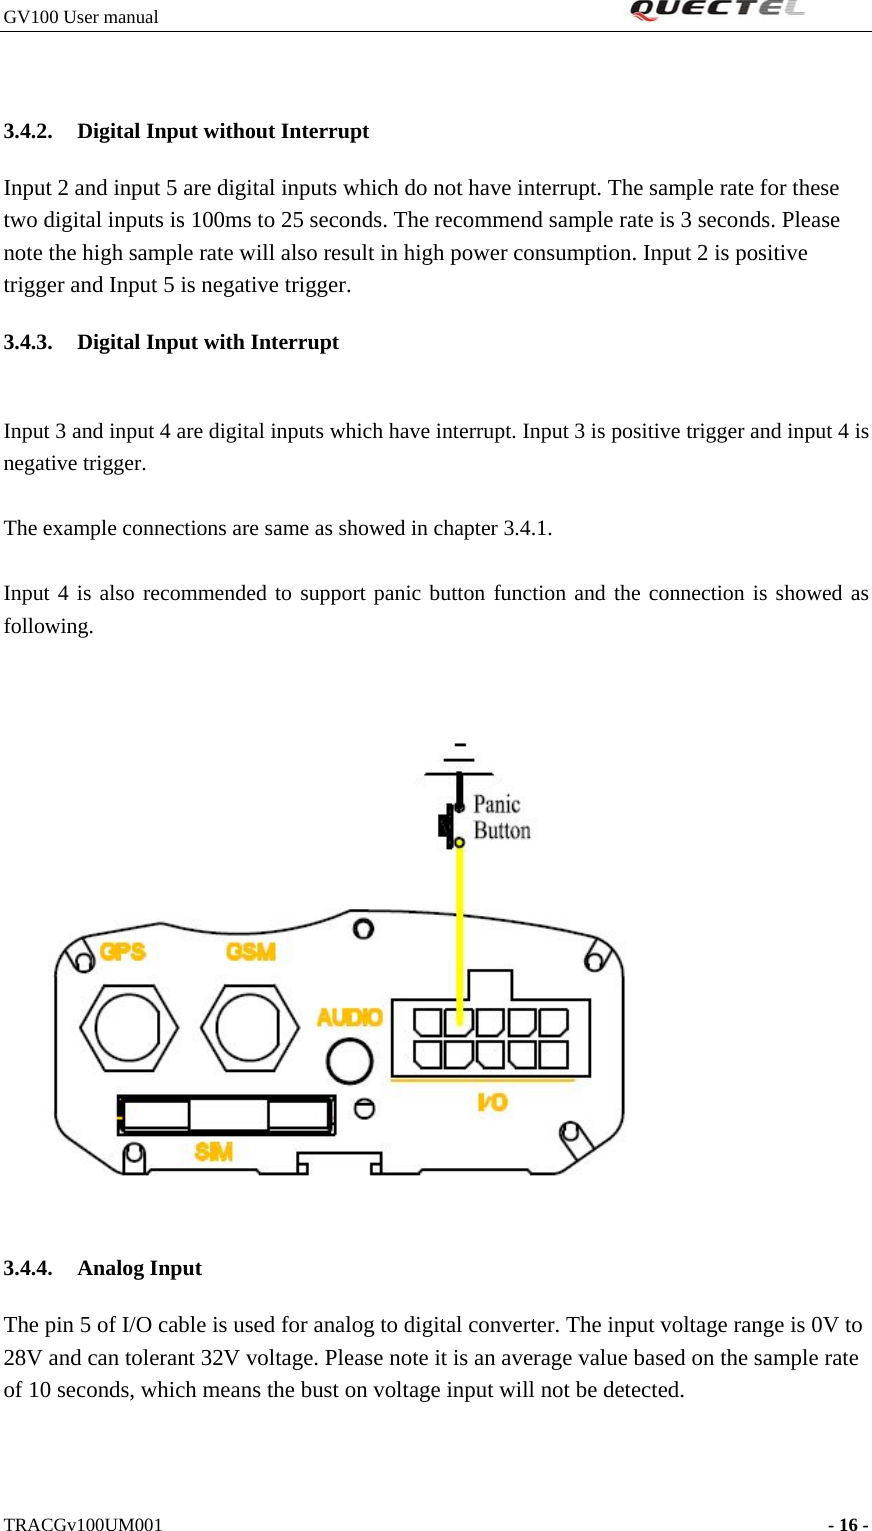 GV100 User manual                                                               3.4.2. Digital Input without Interrupt   Input 2 and input 5 are digital inputs which do not have interrupt. The sample rate for these two digital inputs is 100ms to 25 seconds. The recommend sample rate is 3 seconds. Please note the high sample rate will also result in high power consumption. Input 2 is positive trigger and Input 5 is negative trigger. 3.4.3. Digital Input with Interrupt  Input 3 and input 4 are digital inputs which have interrupt. Input 3 is positive trigger and input 4 is negative trigger.  The example connections are same as showed in chapter 3.4.1.  Input 4 is also recommended to support panic button function and the connection is showed as following.   3.4.4. Analog Input The pin 5 of I/O cable is used for analog to digital converter. The input voltage range is 0V to 28V and can tolerant 32V voltage. Please note it is an average value based on the sample rate of 10 seconds, which means the bust on voltage input will not be detected.    TRACGv100UM001                                                                    - 16 -   